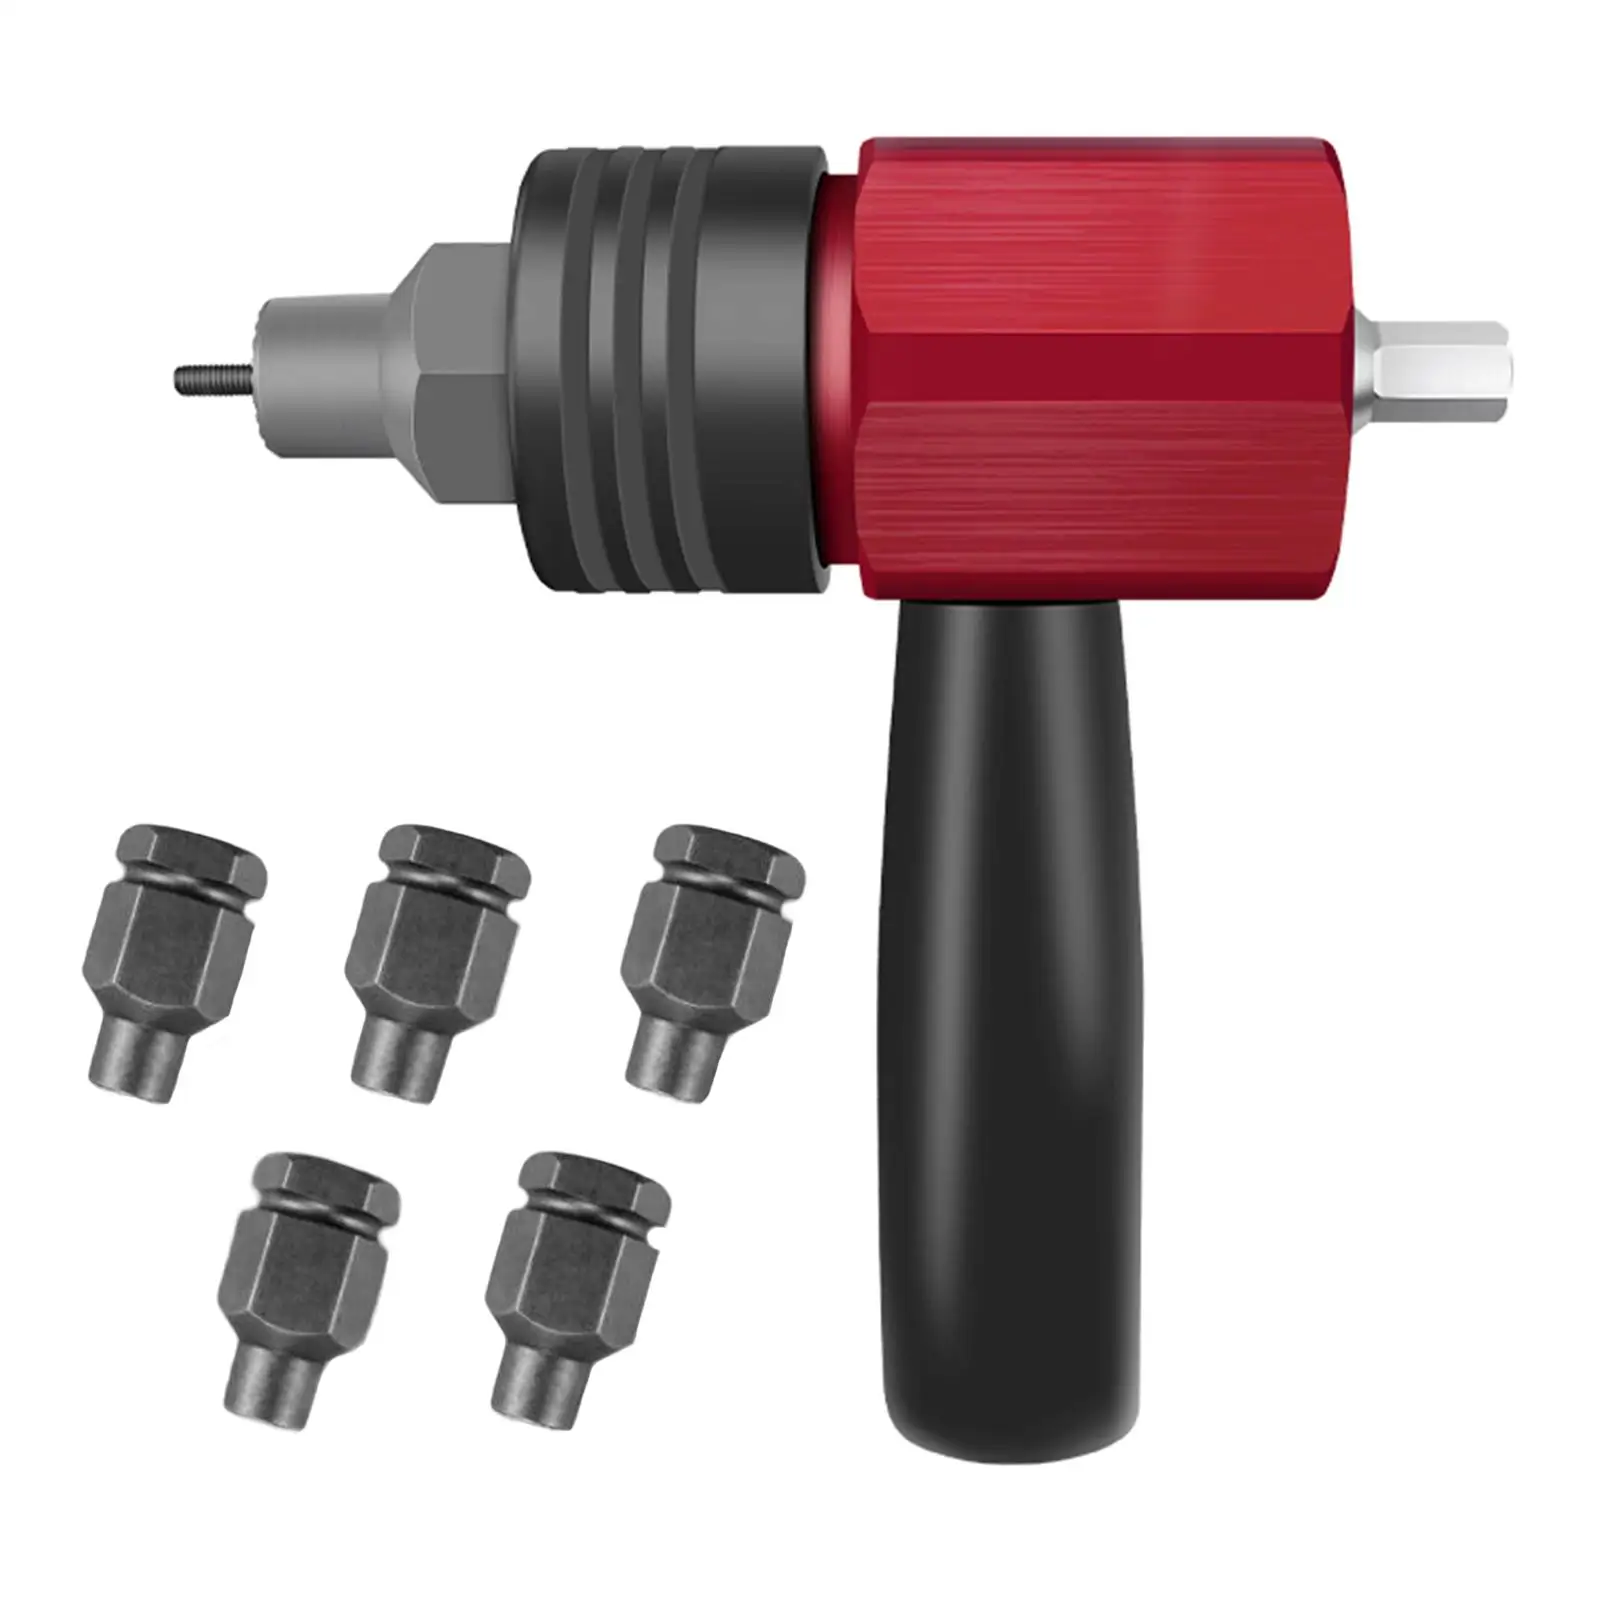 Electric Rivet Gun Adapter Non-Slip Handle Automatic Insert Threaded Hand Tools Compact Rivet Nut Drill Adapter for Home Outdoor